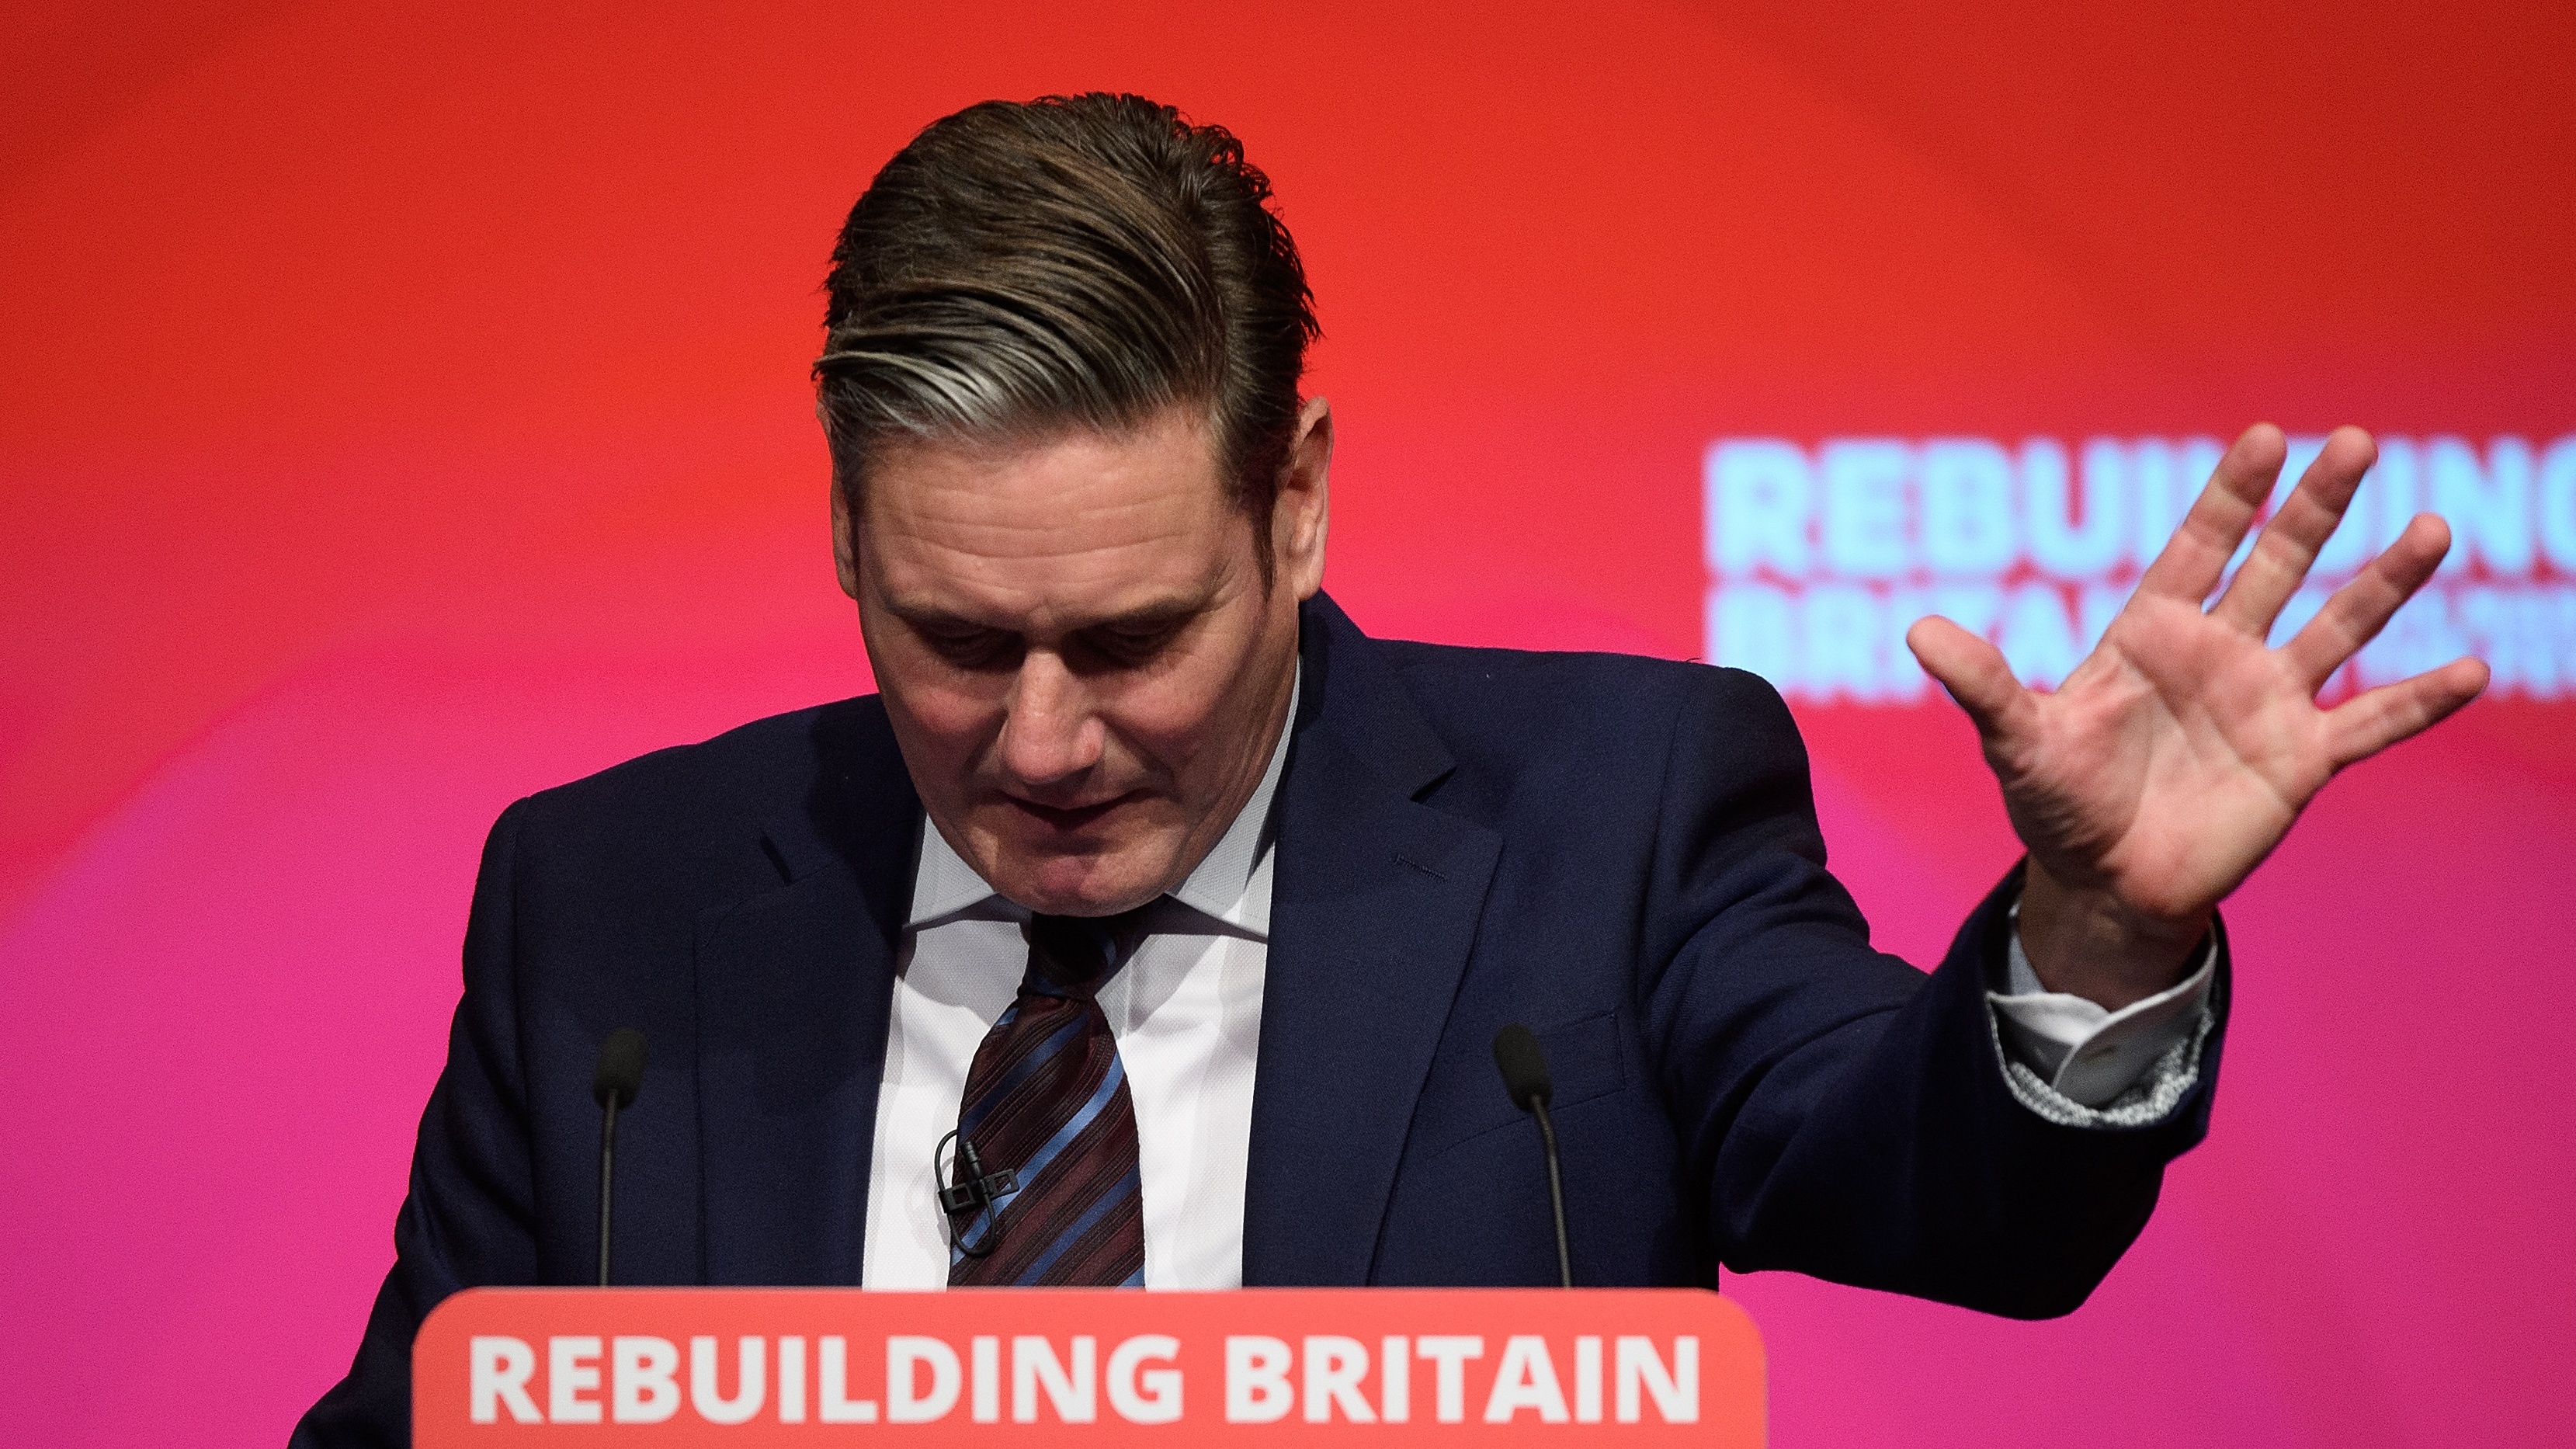 Keir Starmer addresses the 2019 Labour party conference.